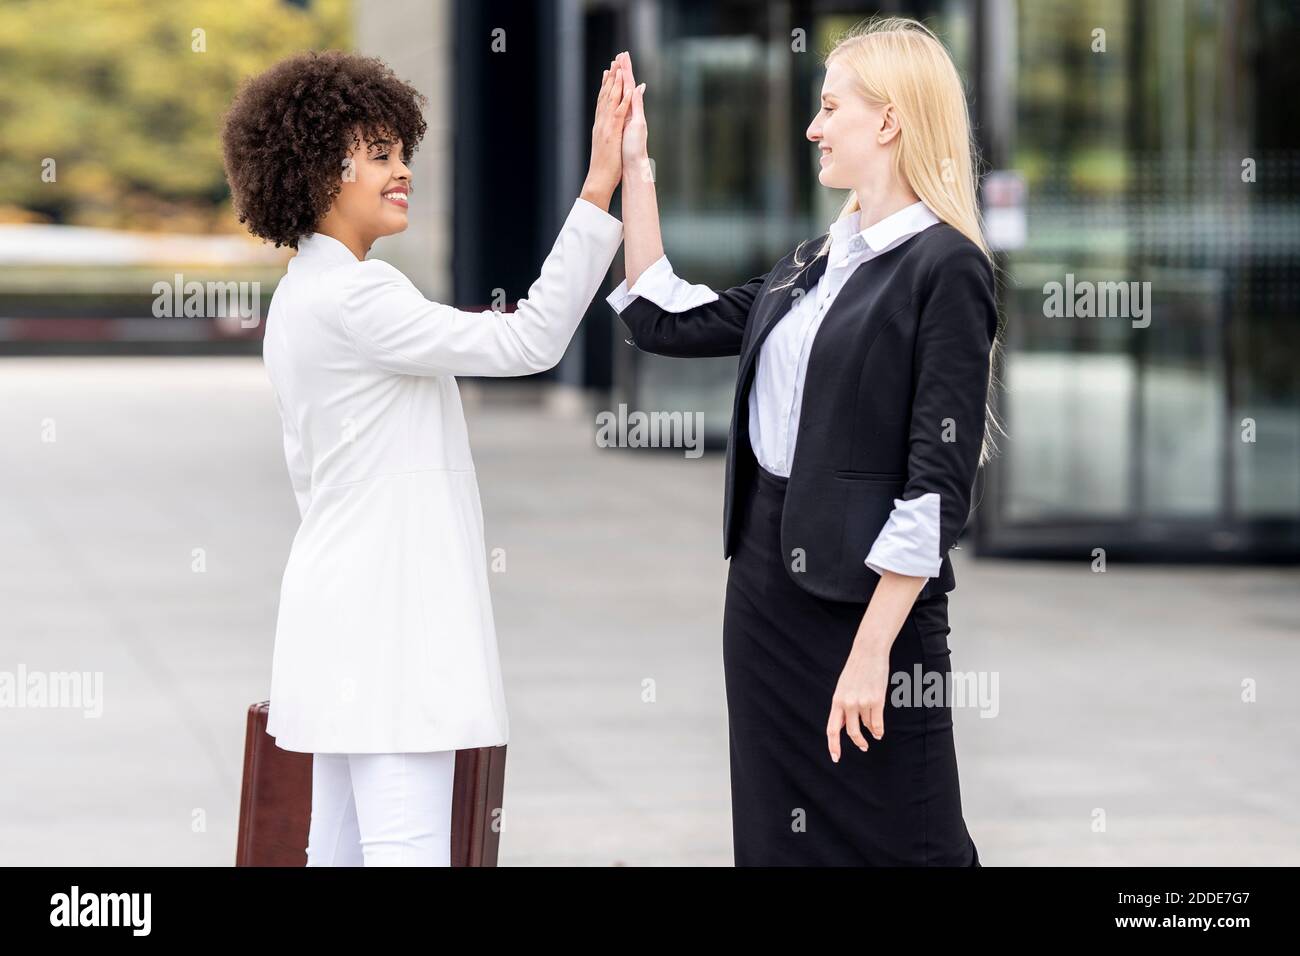 Business people greeting with giving high-five while standing outdoors Stock Photo